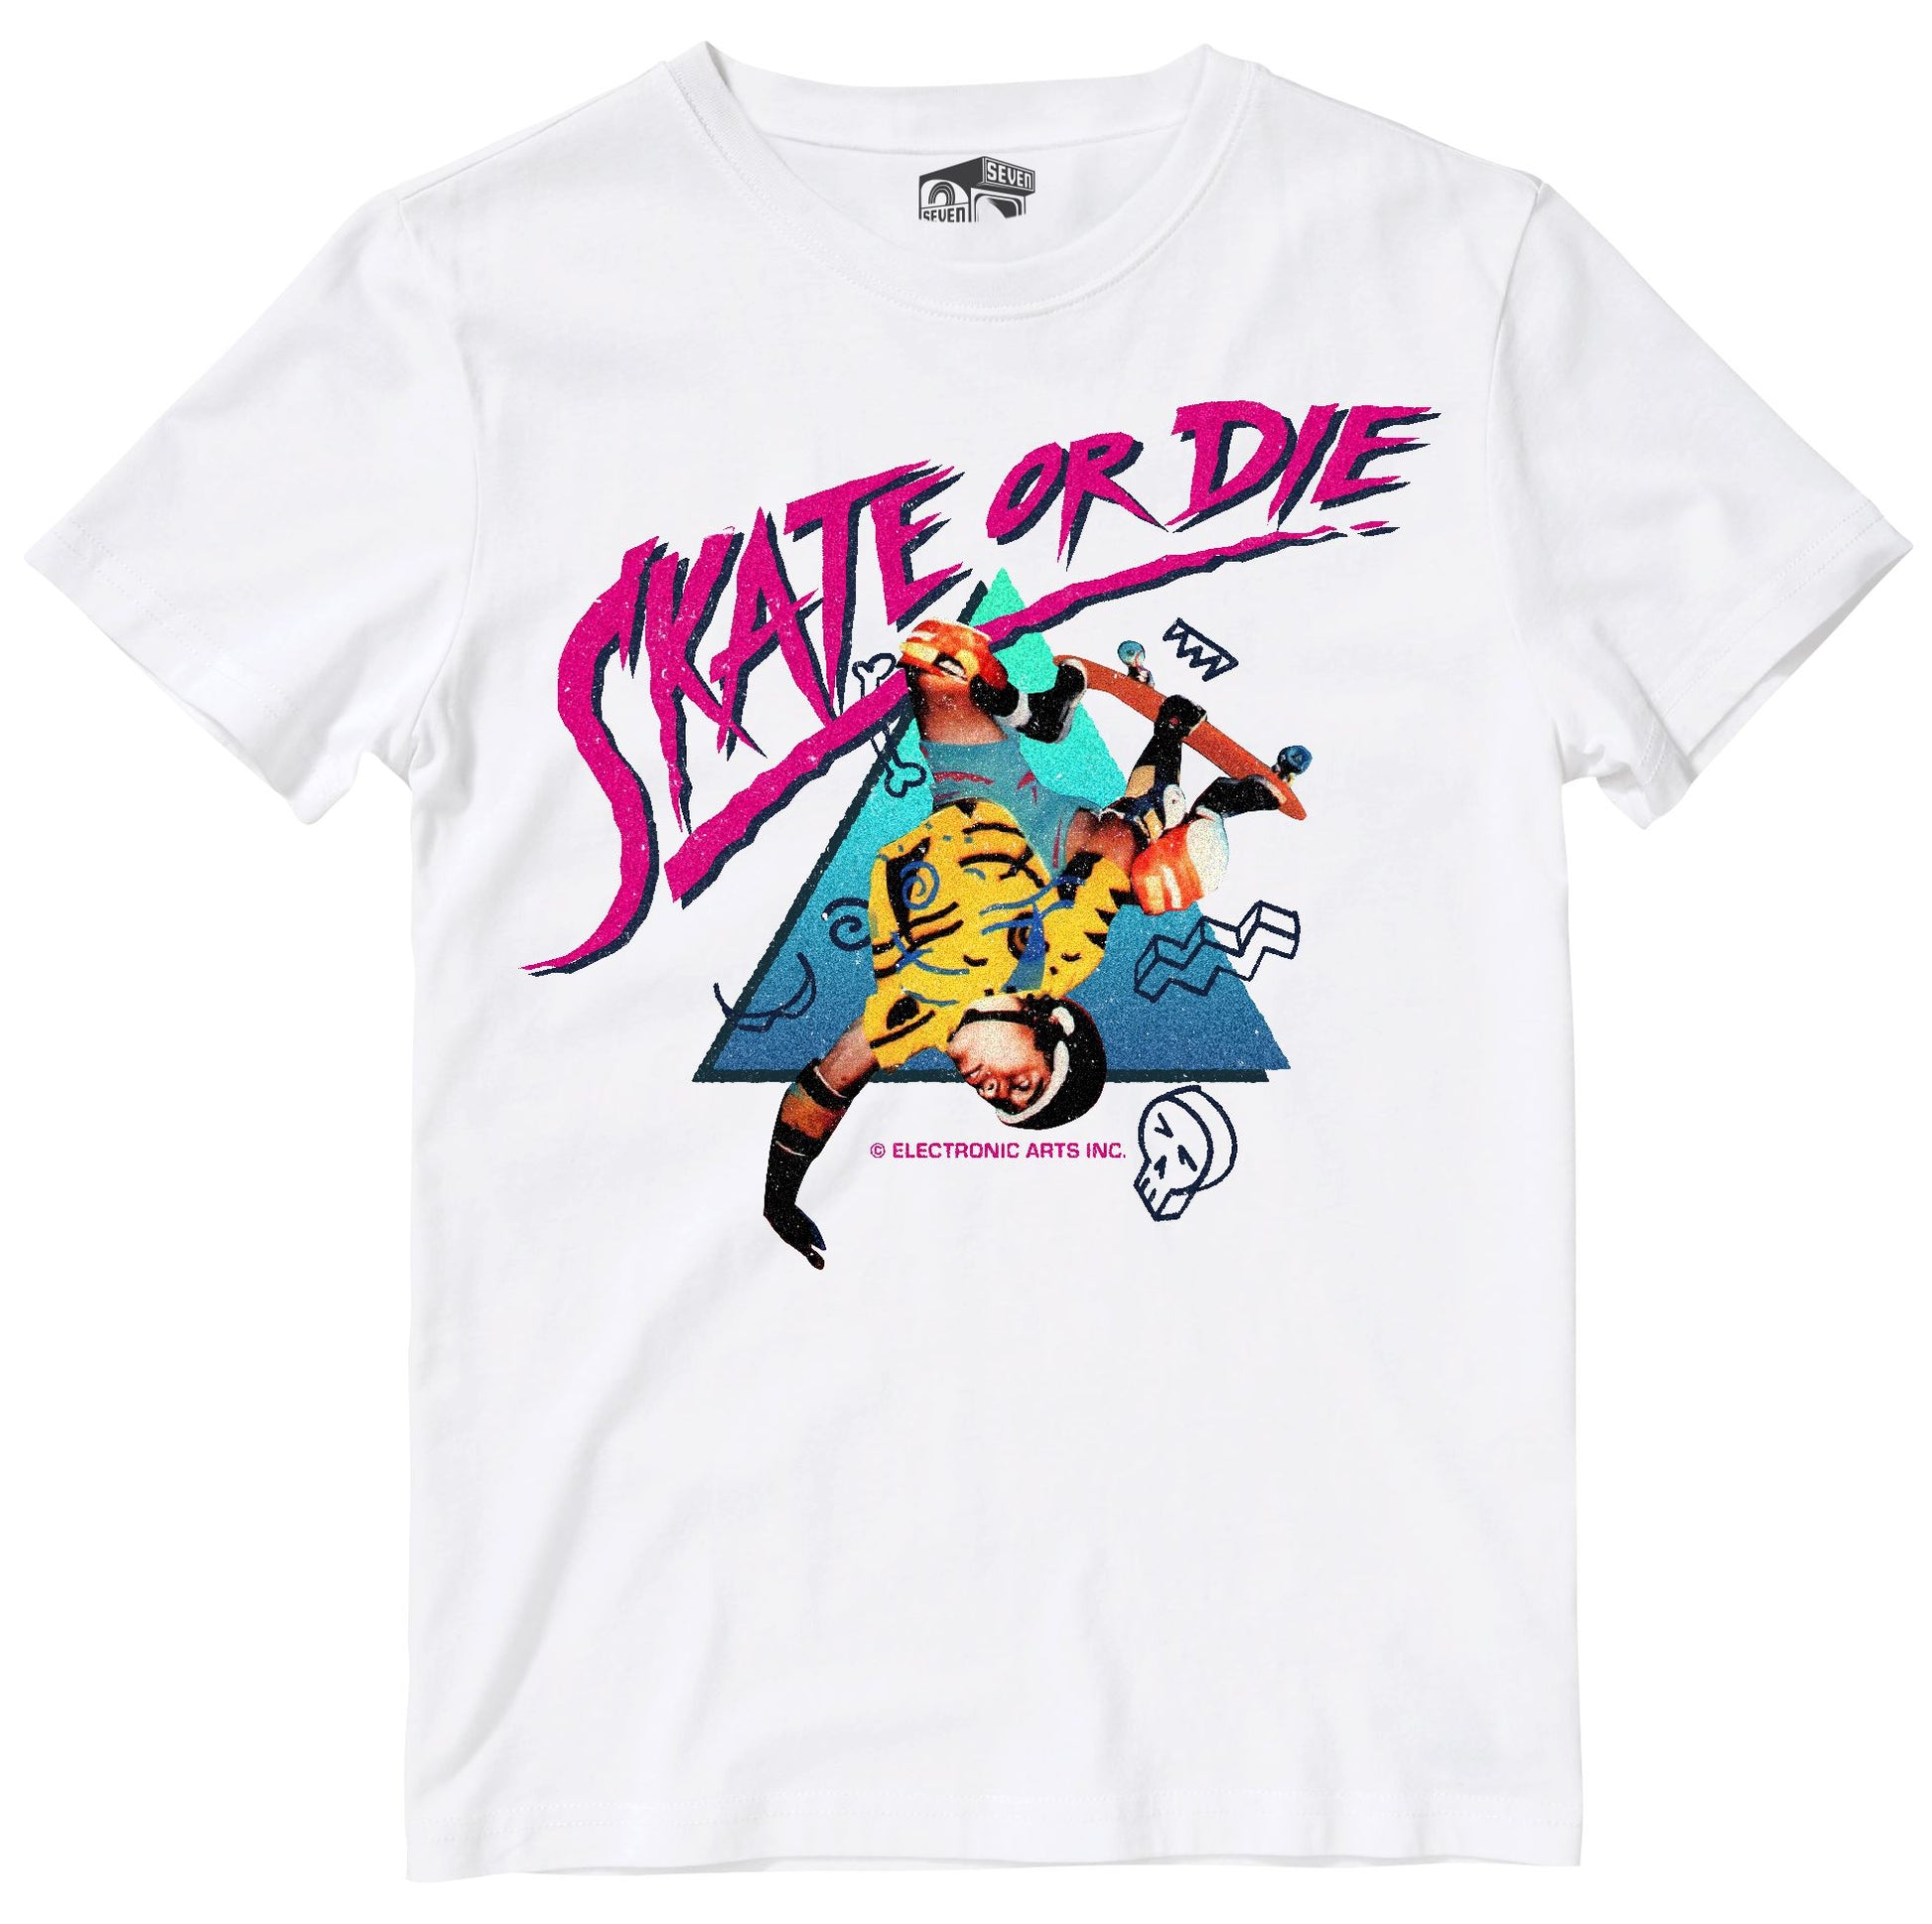 Skate or Die Retro Gaming T-Shirt SIOW Edition T-Shirt Seven Squared 